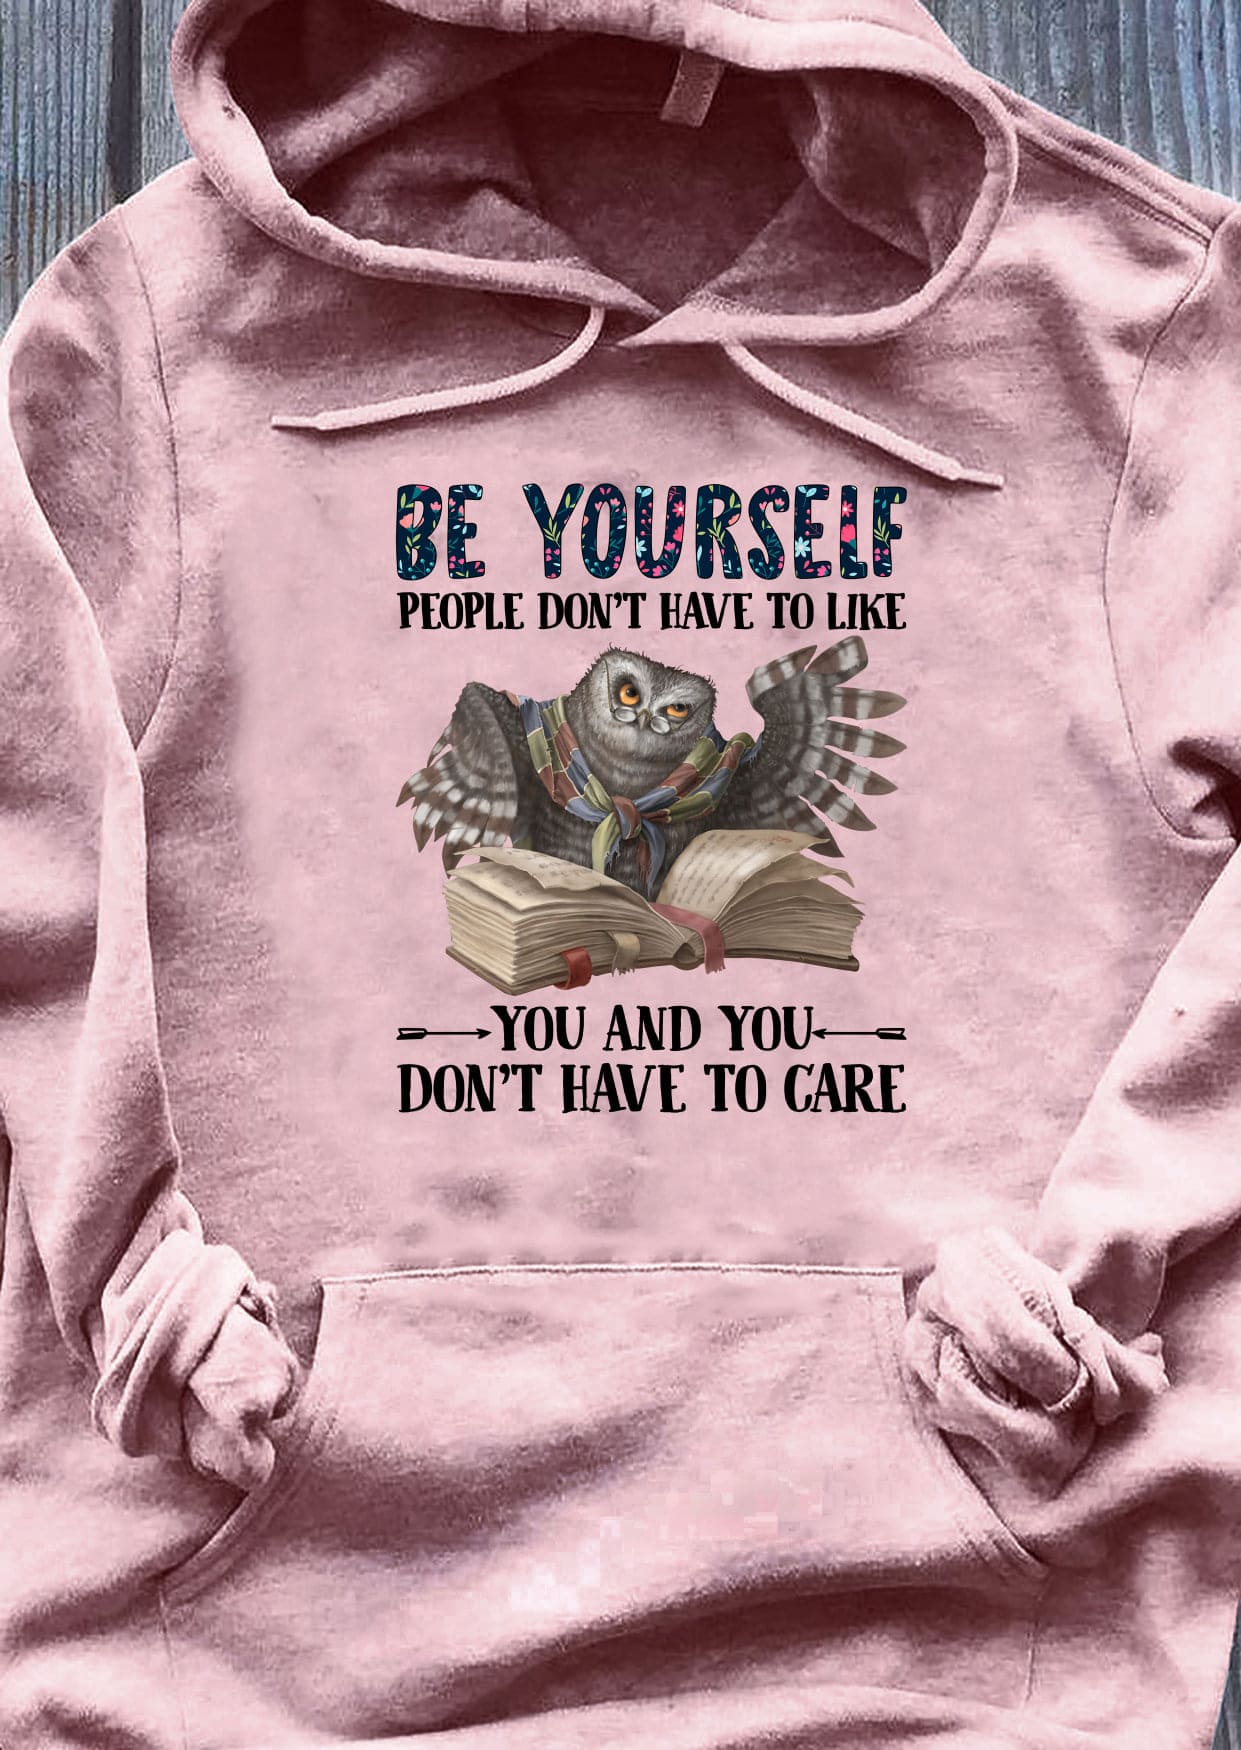 Be yourself, people don't have to like you and you don't have to care - Book owl, gift for book reader